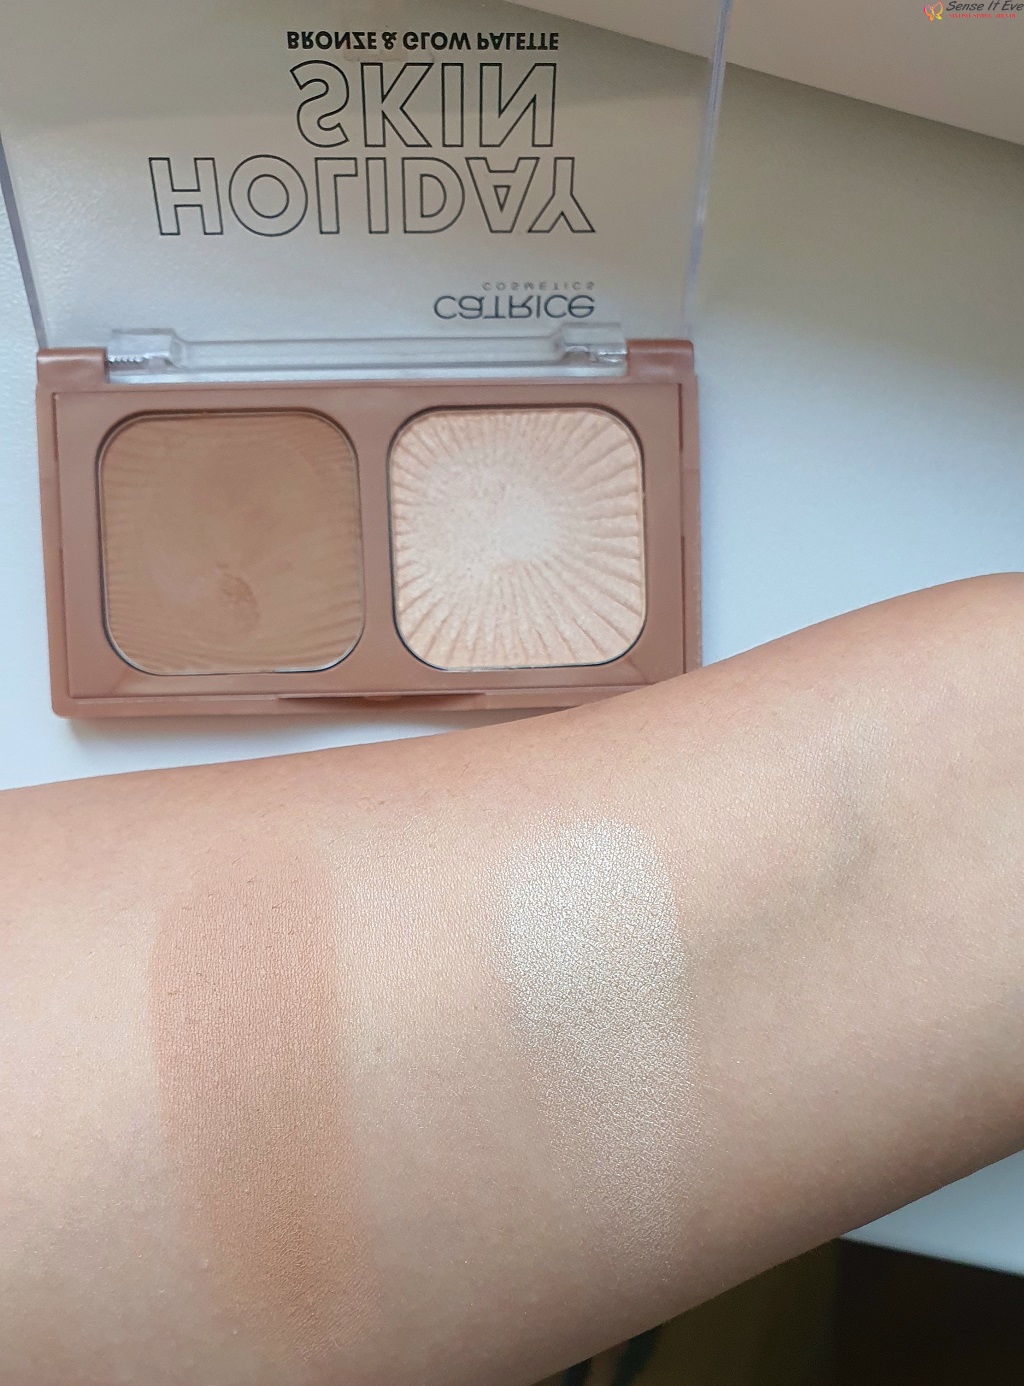 Catrice Holiday Skin Bronze & Glow Palette Swatches 2